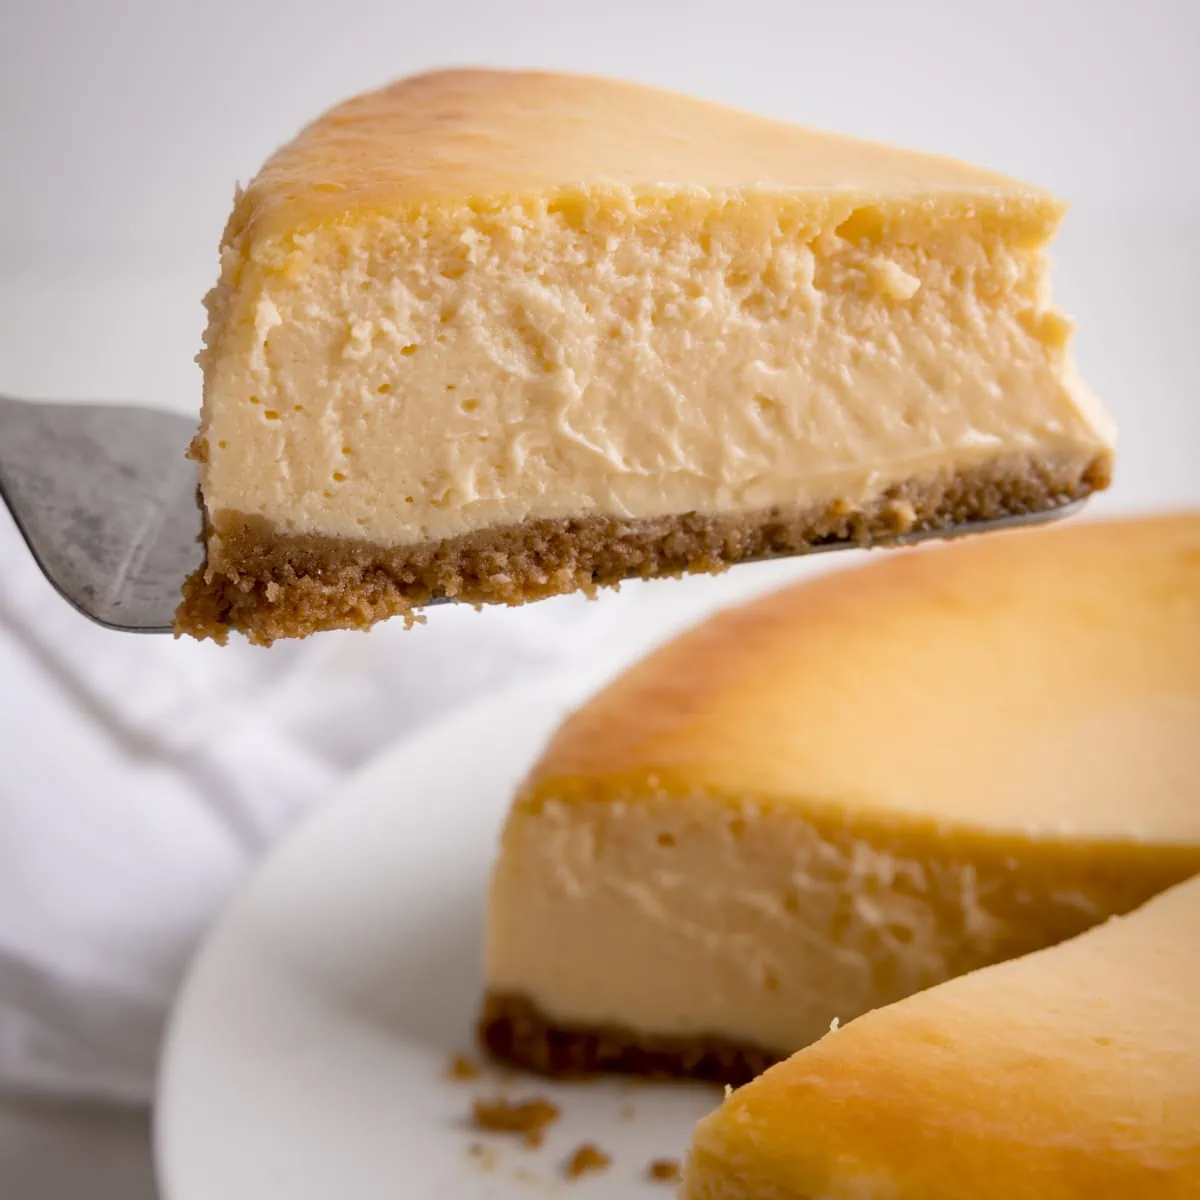 A close up square image of a slice being take from a New York Cheesecake against a white background.